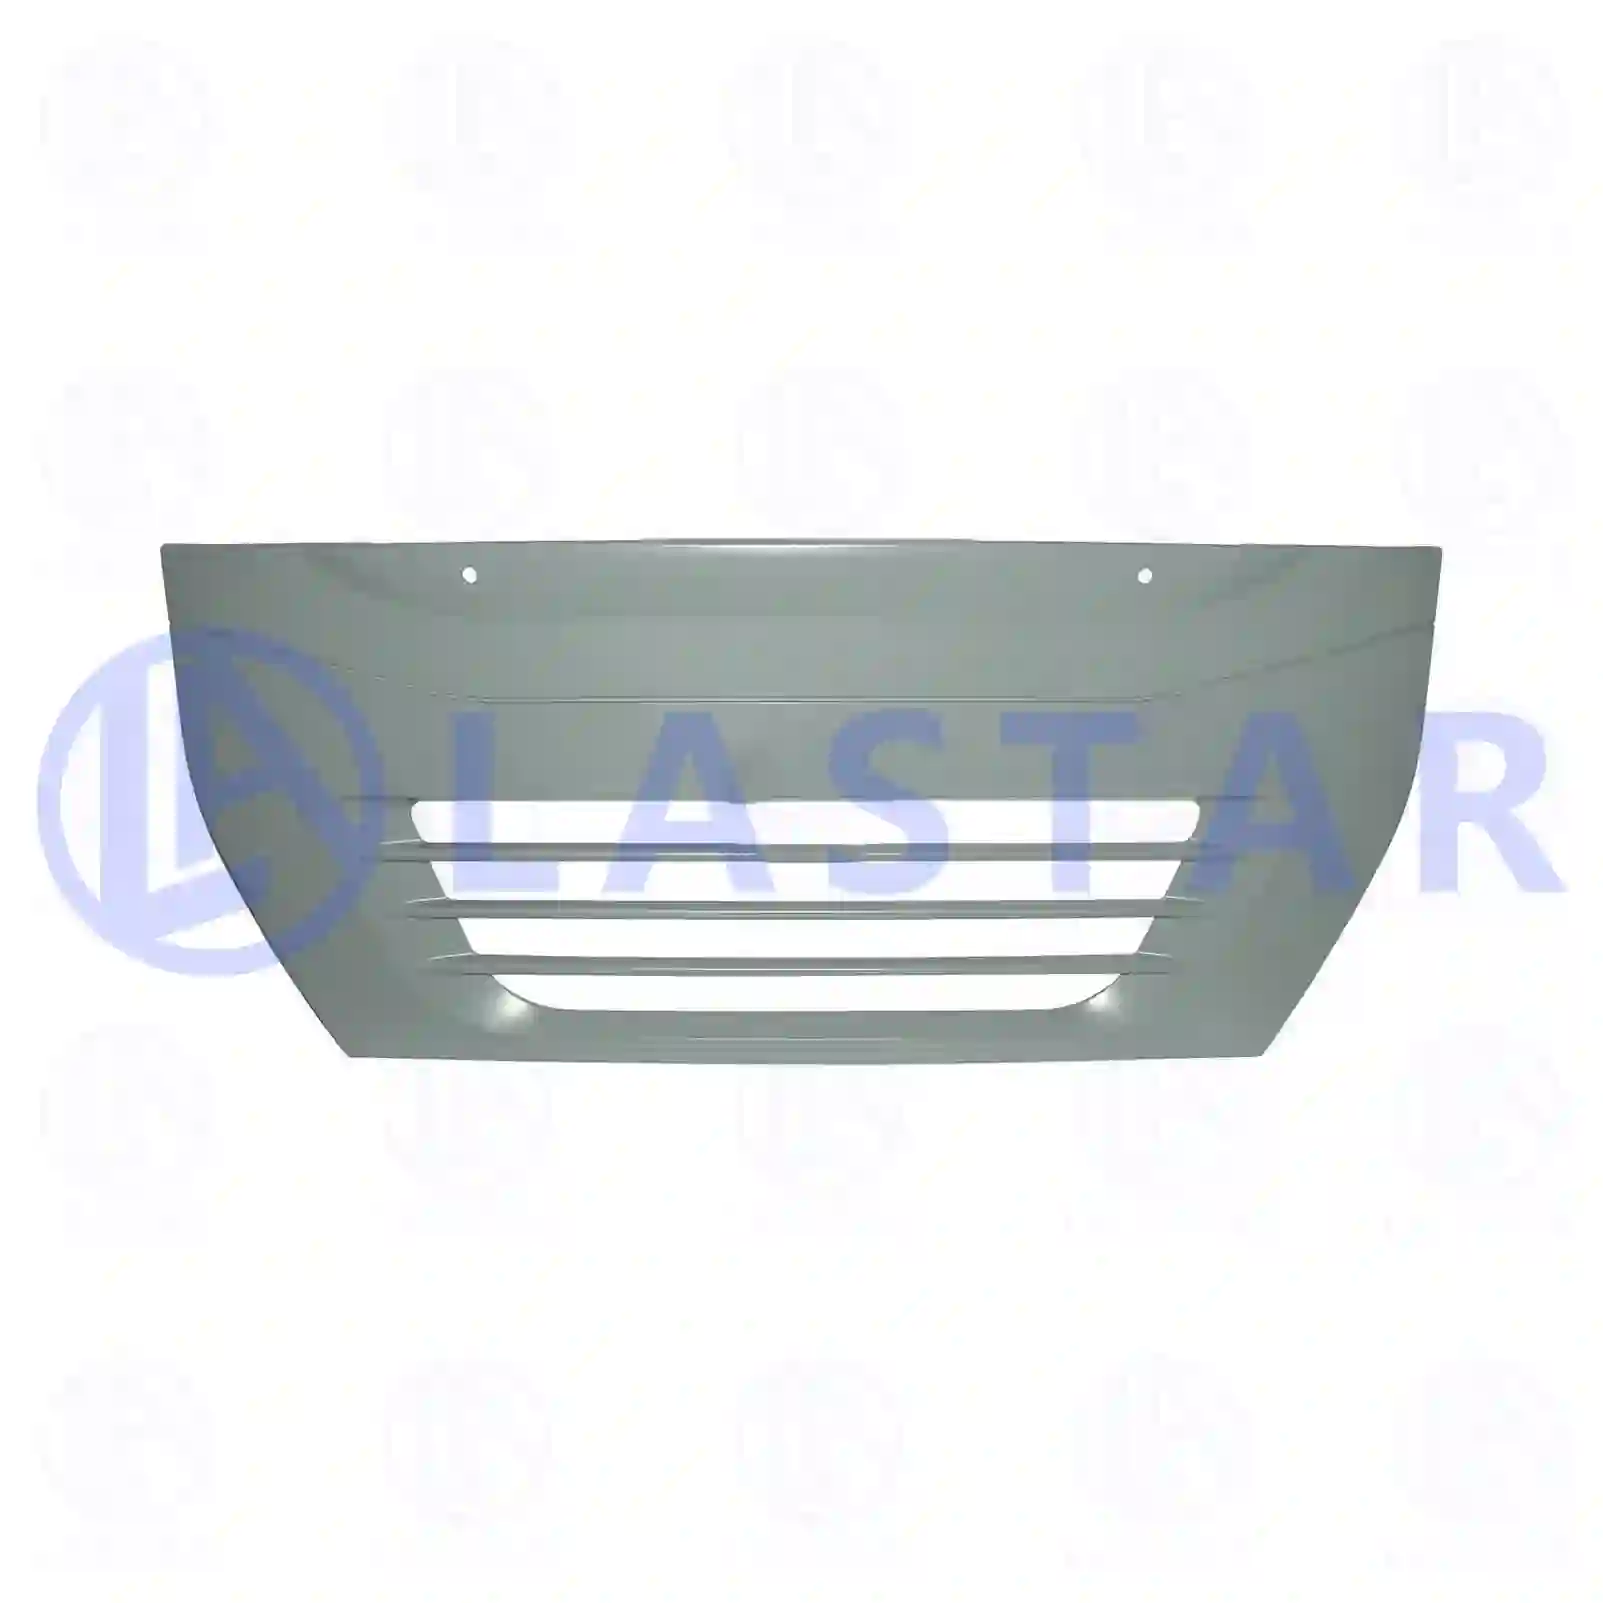 Front grill, 77720157, 500398112 ||  77720157 Lastar Spare Part | Truck Spare Parts, Auotomotive Spare Parts Front grill, 77720157, 500398112 ||  77720157 Lastar Spare Part | Truck Spare Parts, Auotomotive Spare Parts